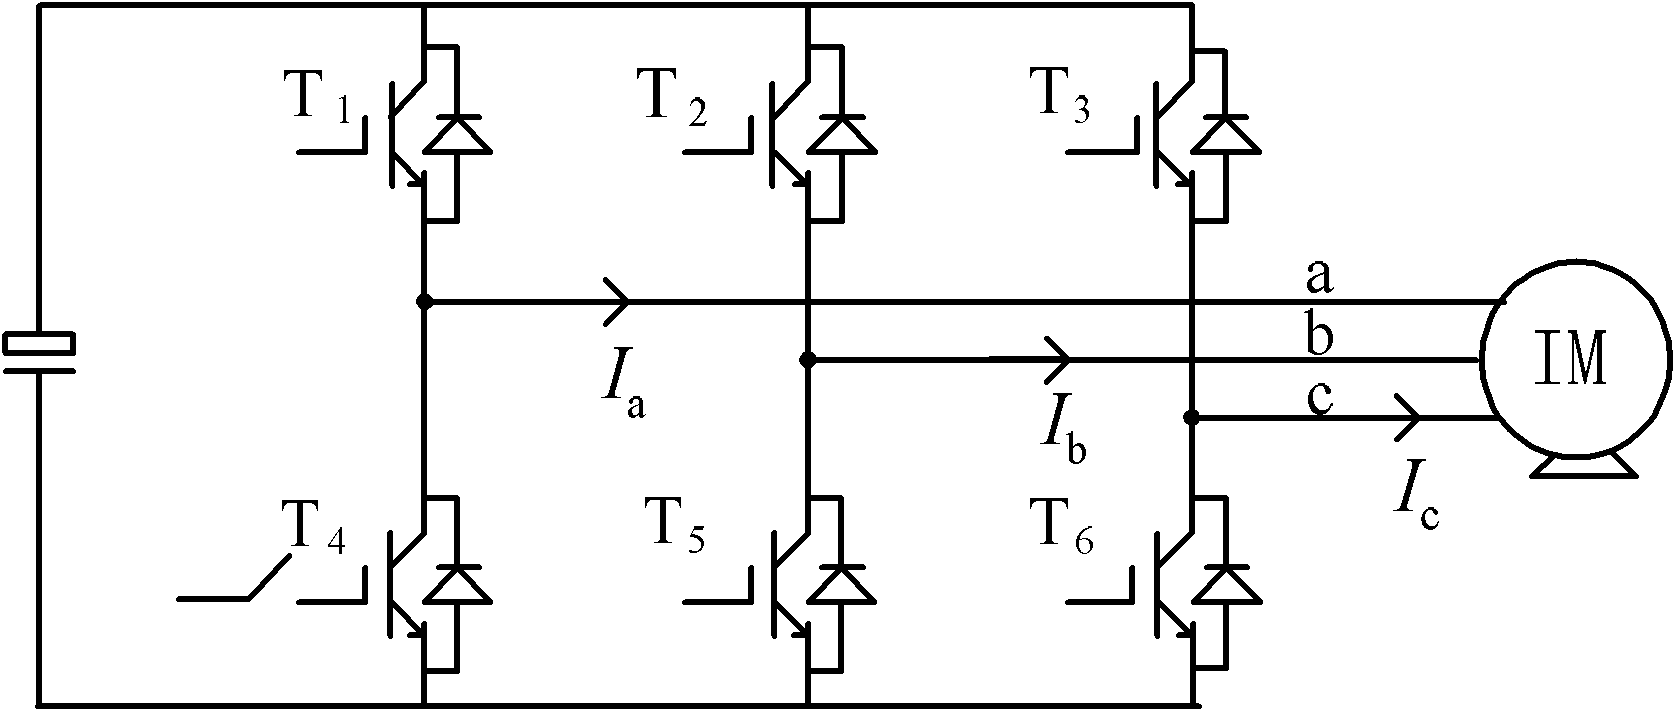 IGBT stuck-open fault diagnosis method for three-phase inverter bridge of frequency converter